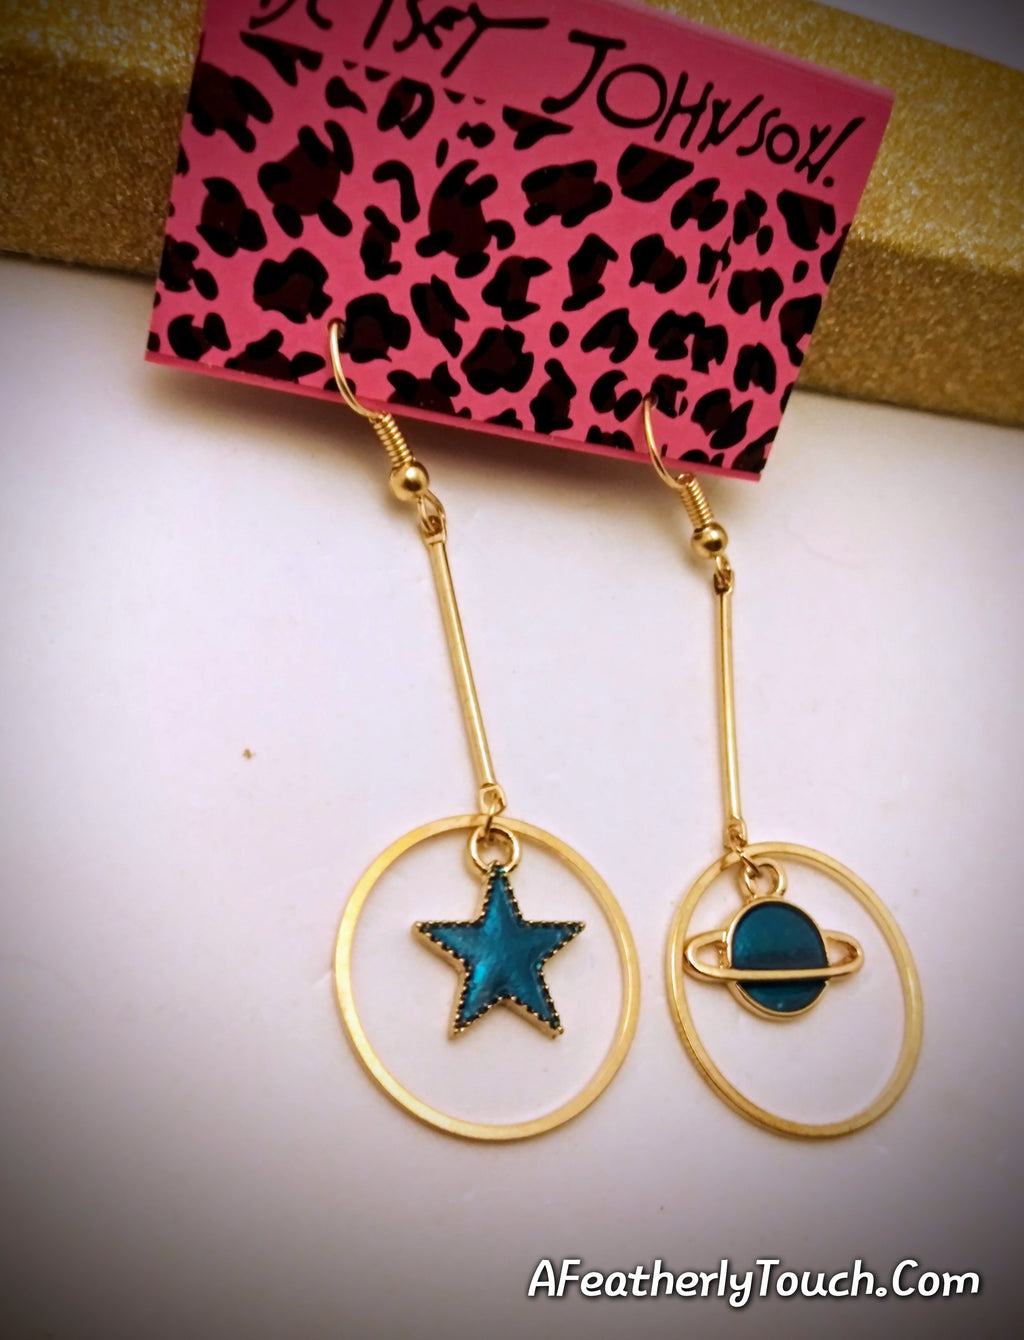 Beautiful Betsey Johnson Unique Planet and Star Earrings